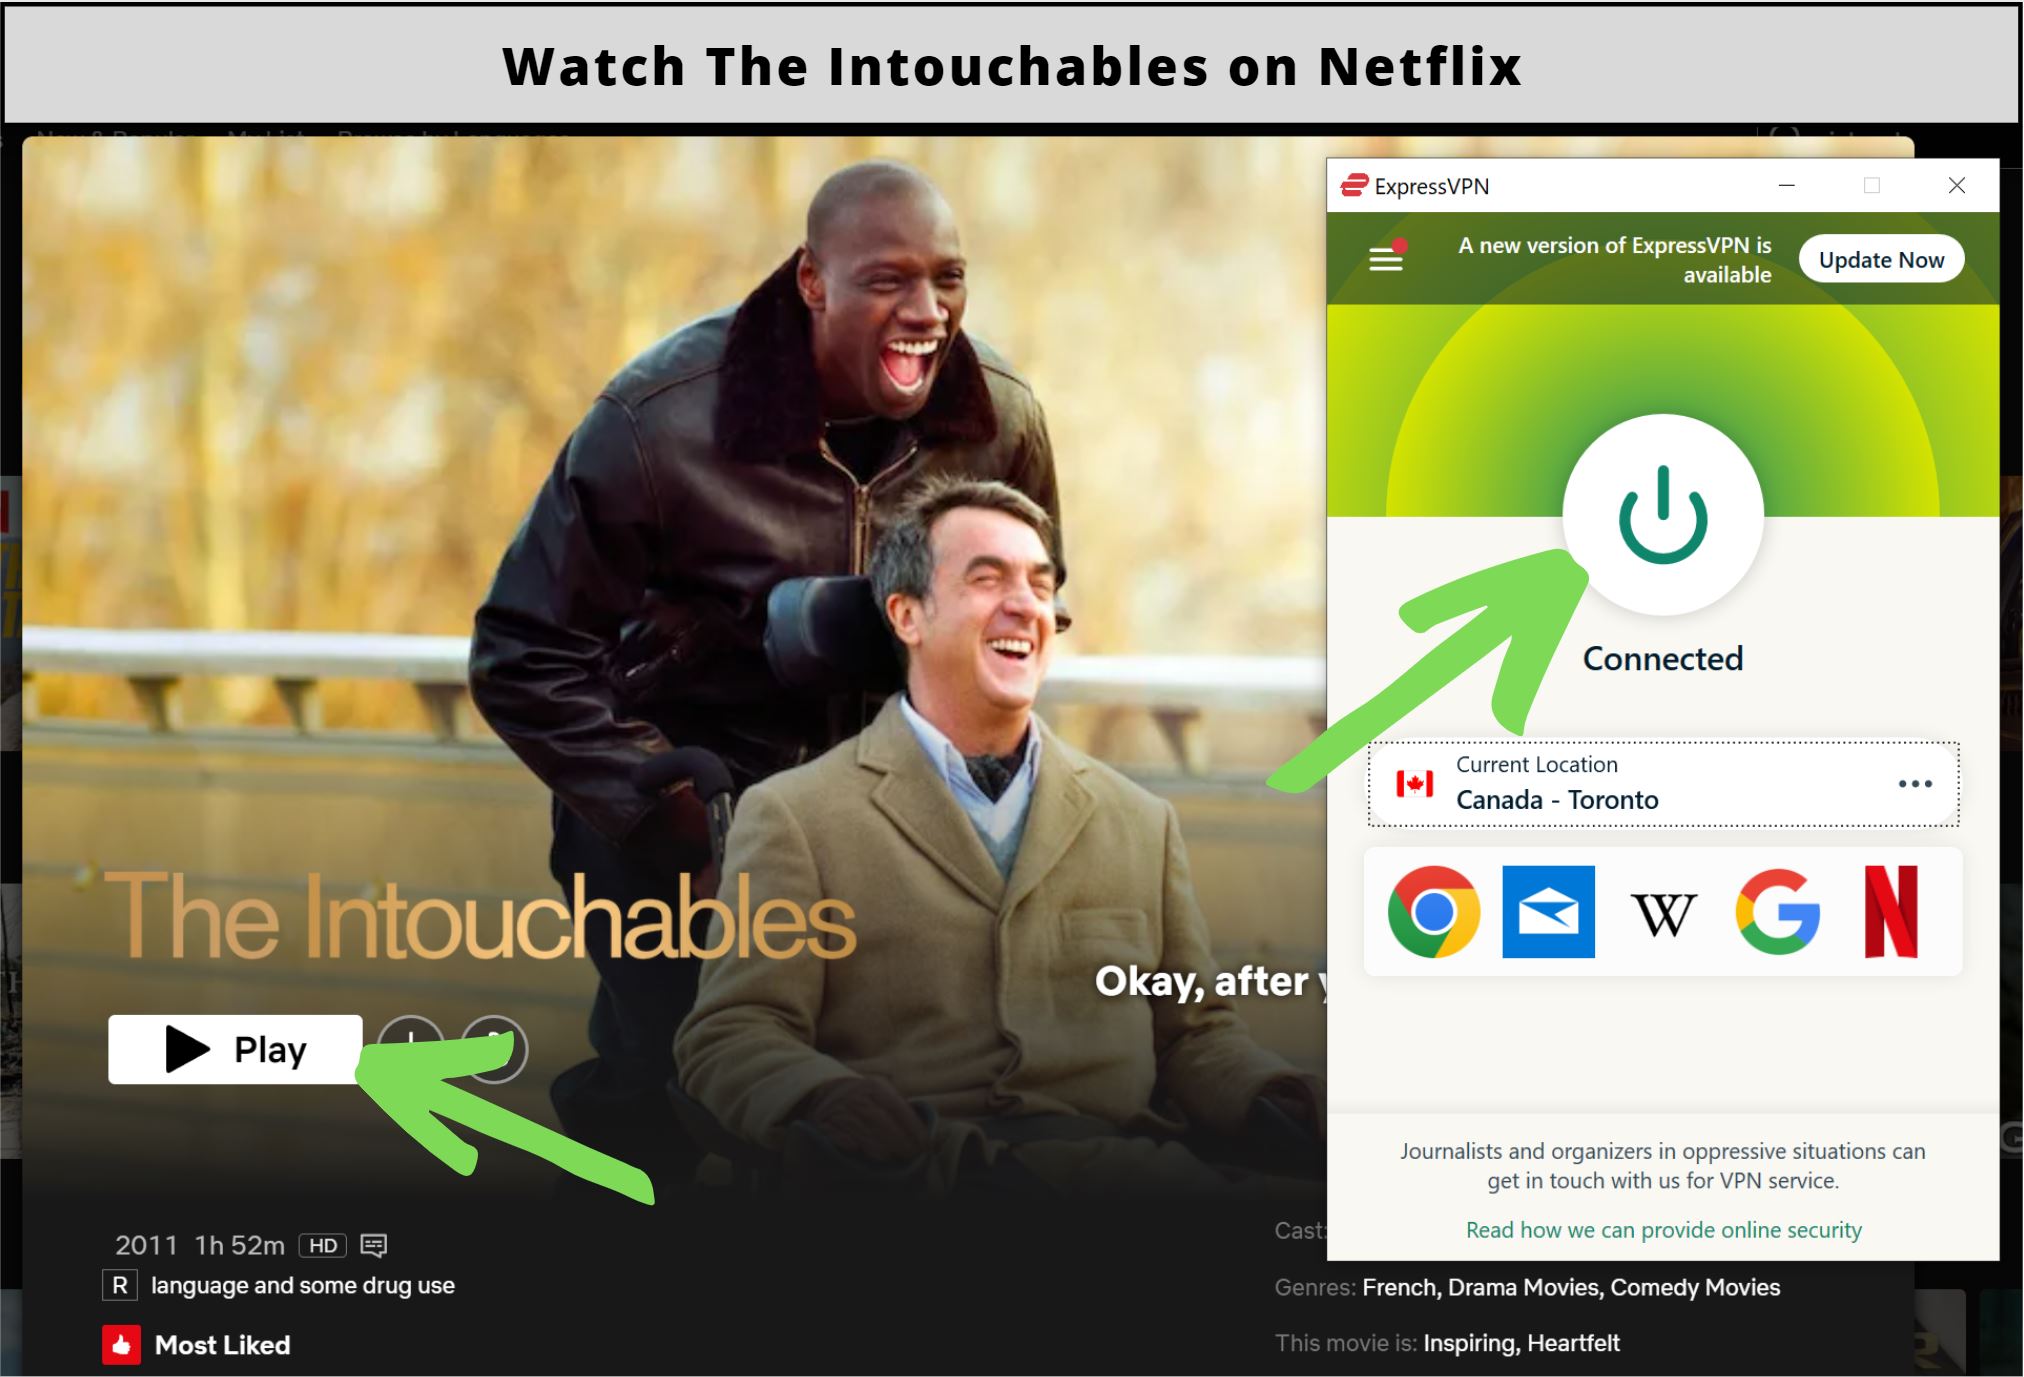 How to Watch The Intouchables on Netflix